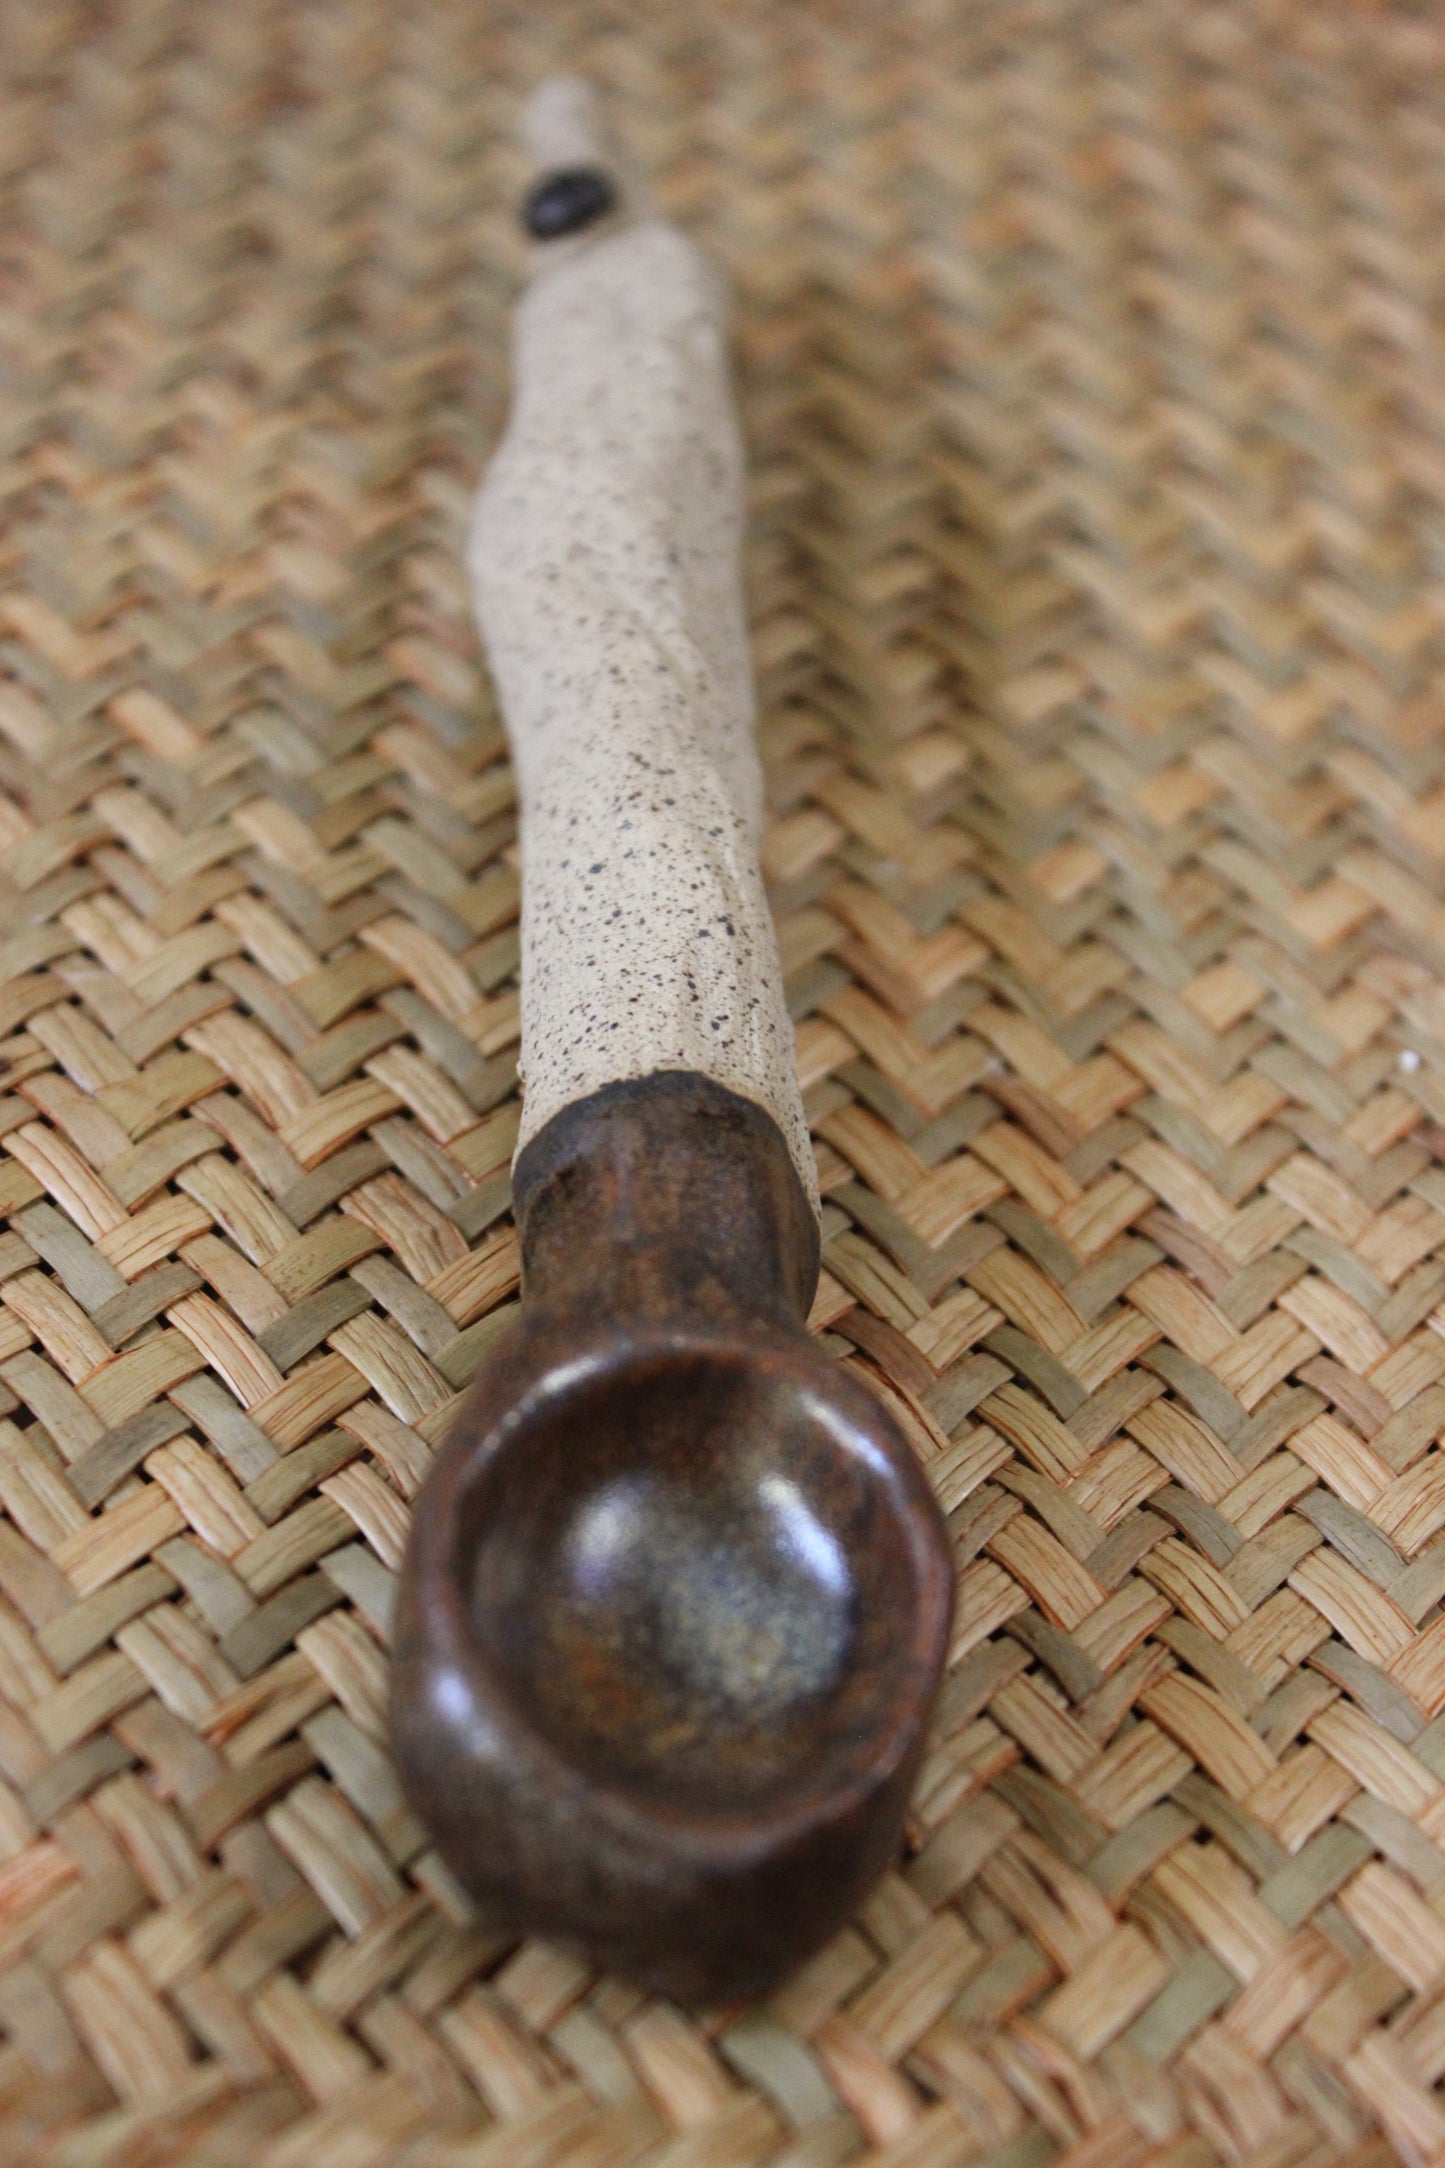 Earthy Ceramic Blue-Black Serving Spoon as a Unique Ornament or for Food Consumption